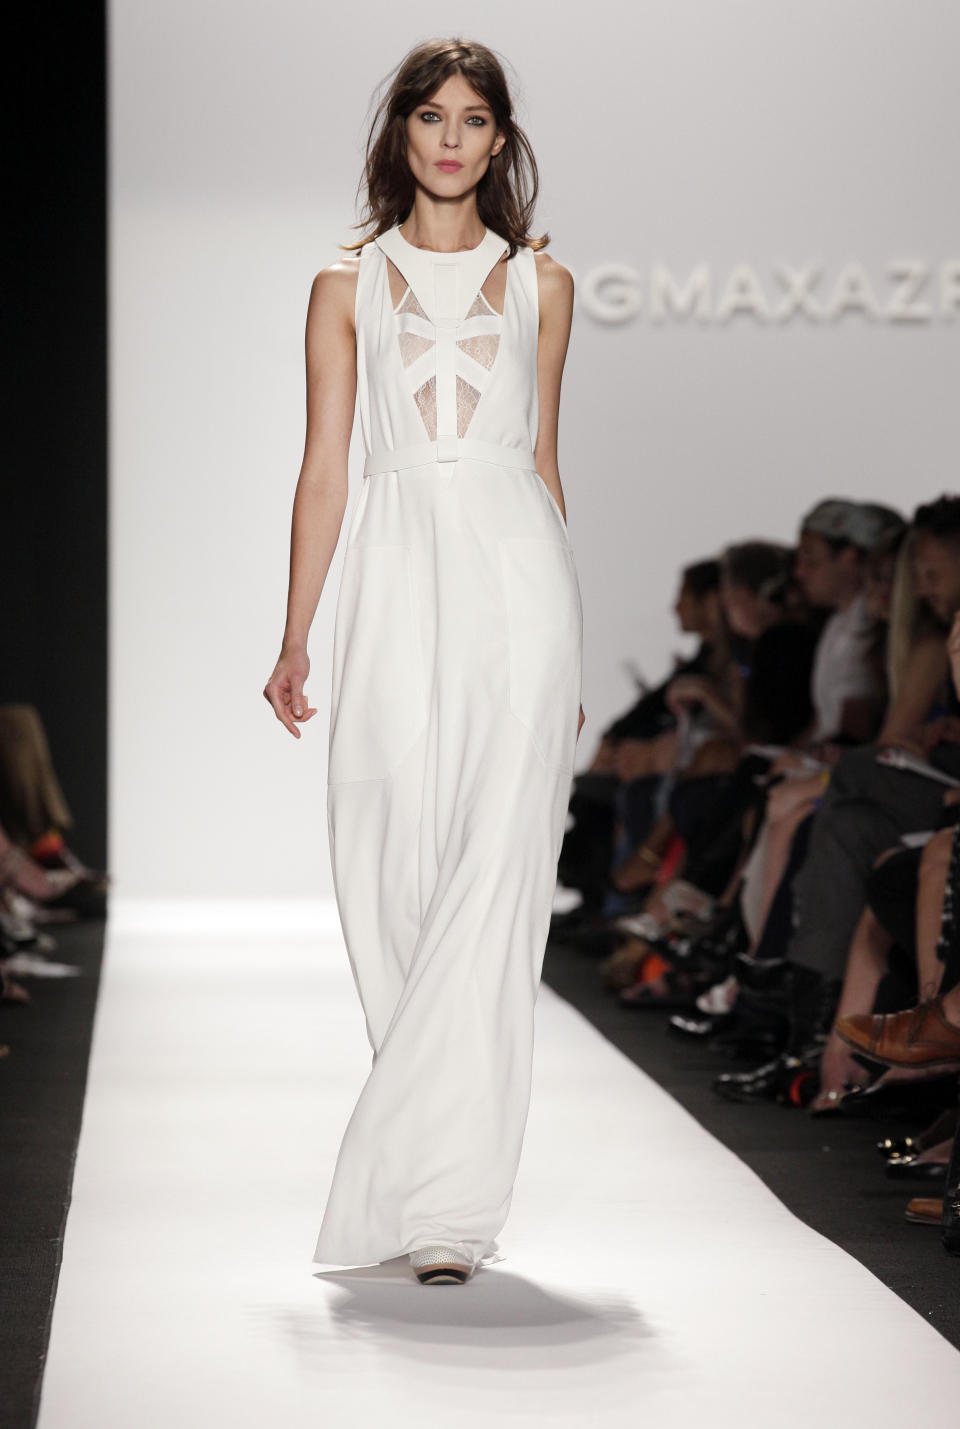 The BCBG MAX AZRIA Spring 2013 collection is modeled during Fashion Week in New York, Thursday, Sept. 6, 2012. (AP Photo/Richard Drew)